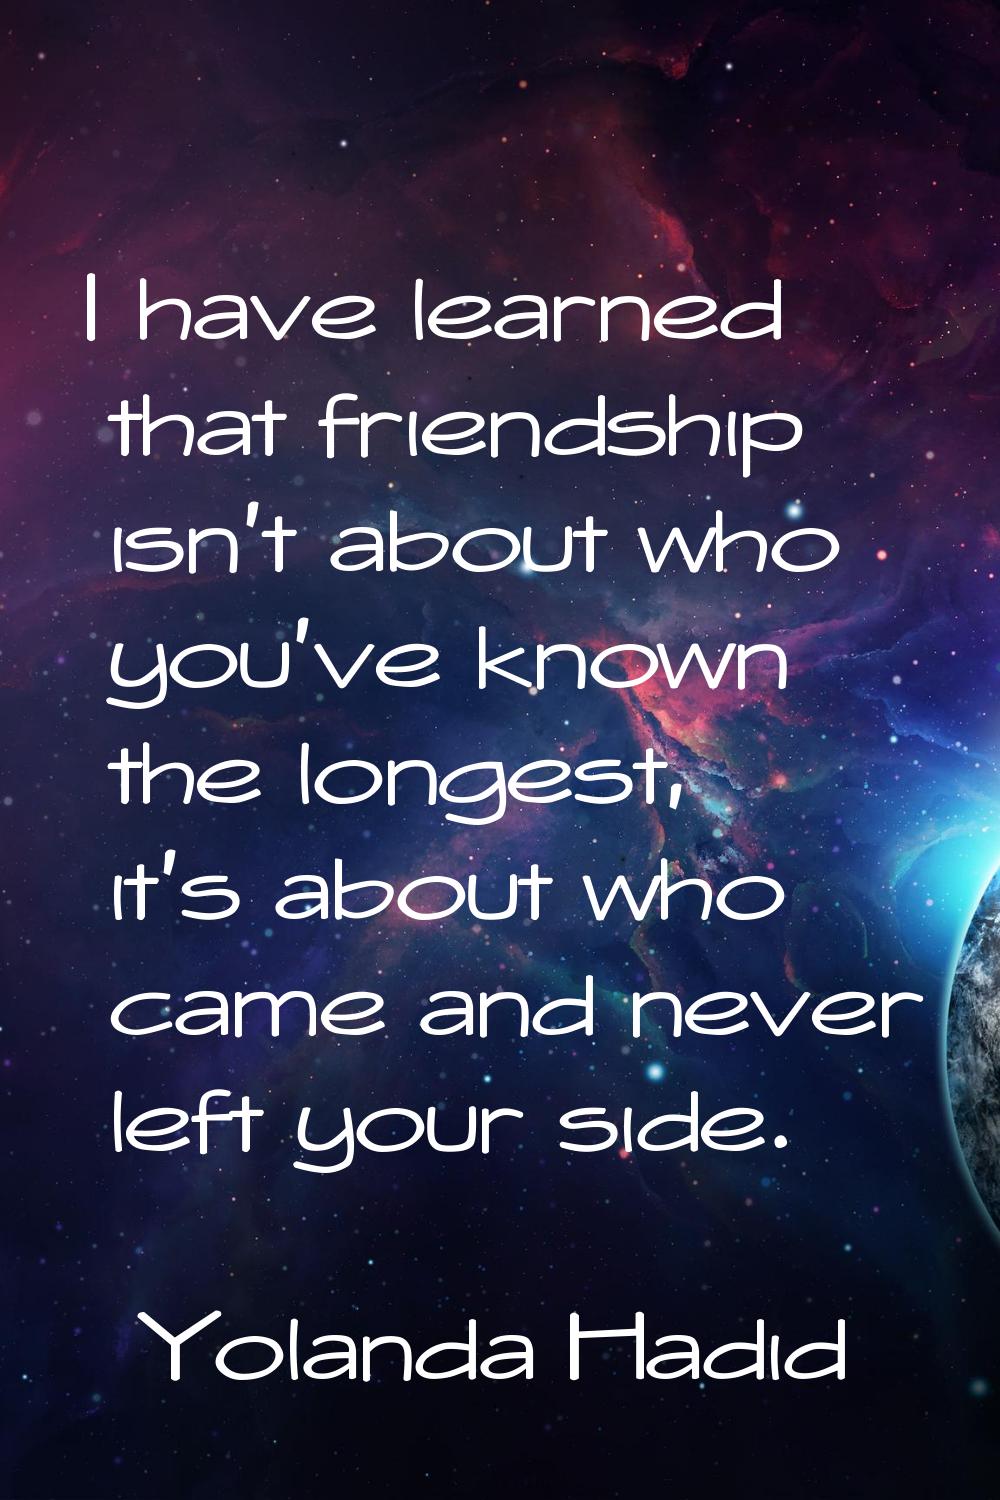 I have learned that friendship isn't about who you've known the longest, it's about who came and ne